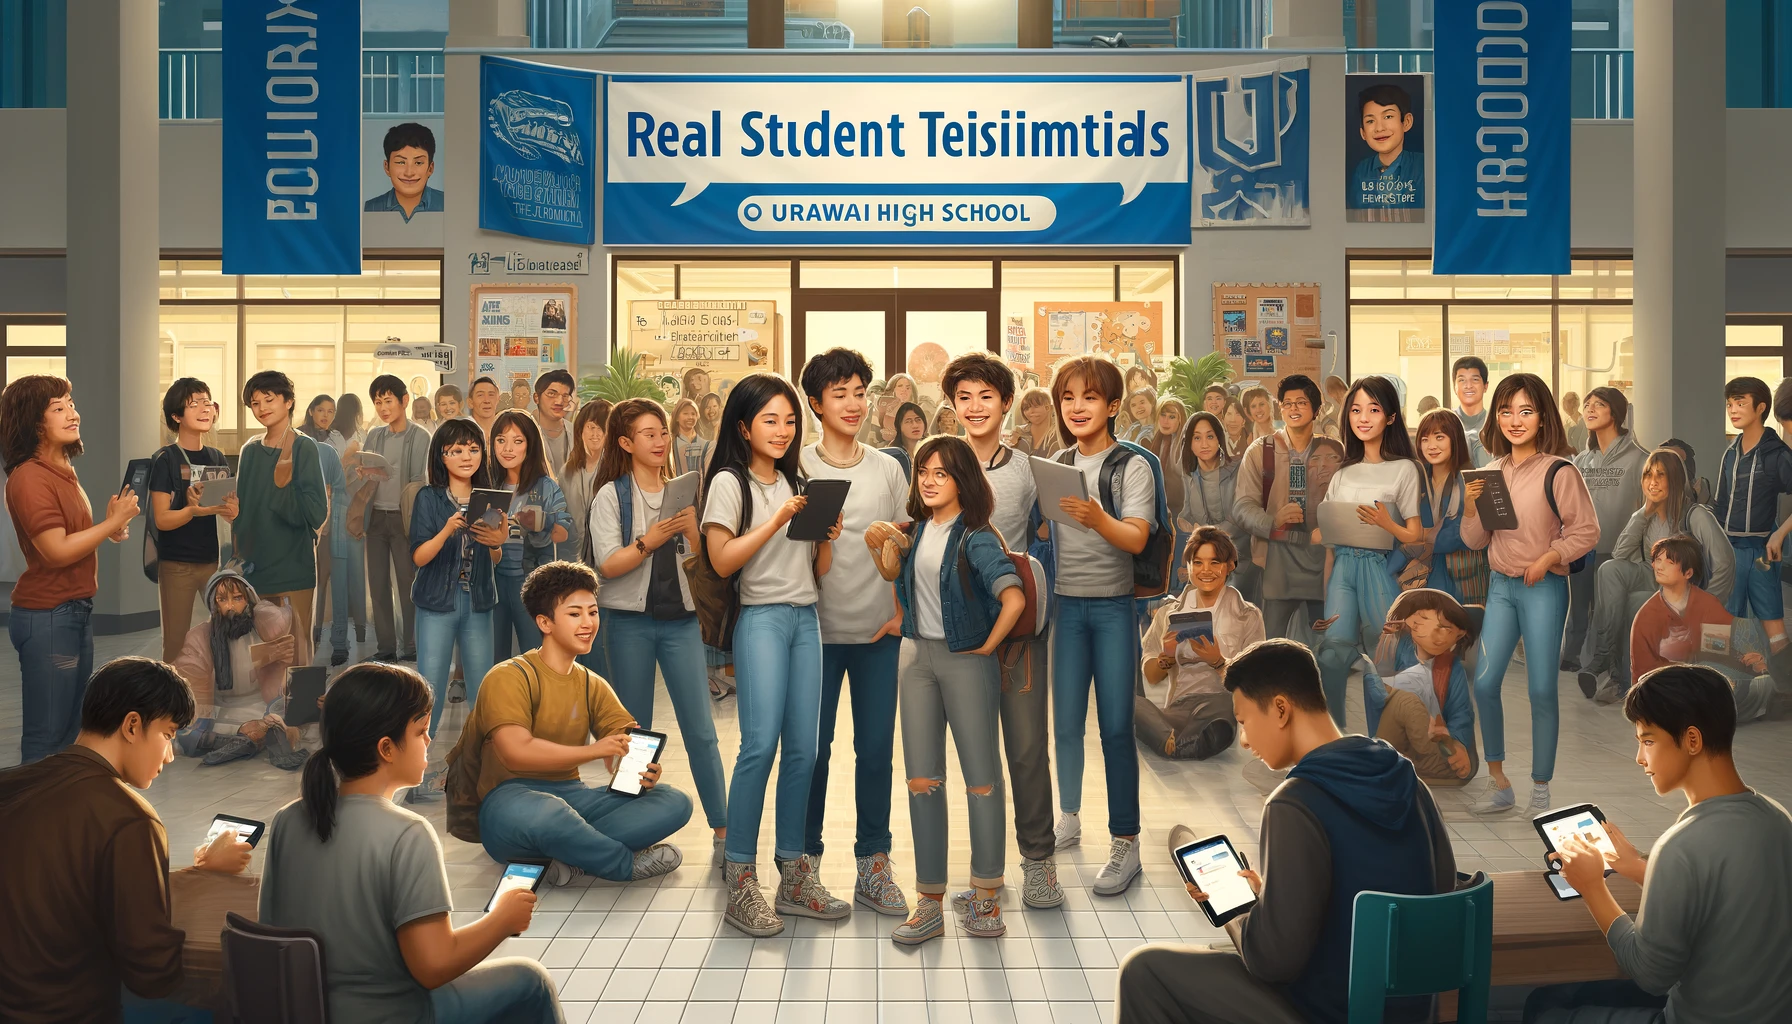 A lively scene at Urawai High School, capturing real student testimonials about their experiences. The image depicts a diverse group of students from various Asian descents gathered in a modern school setting, holding digital tablets and smartphones displaying their reviews. Some students are chatting animatedly, others are typing on their devices. The background features school banners and a bulletin board filled with student activities and accolades. The atmosphere is casual and vibrant, reflecting a community engaged and connected through their shared experiences at the school.